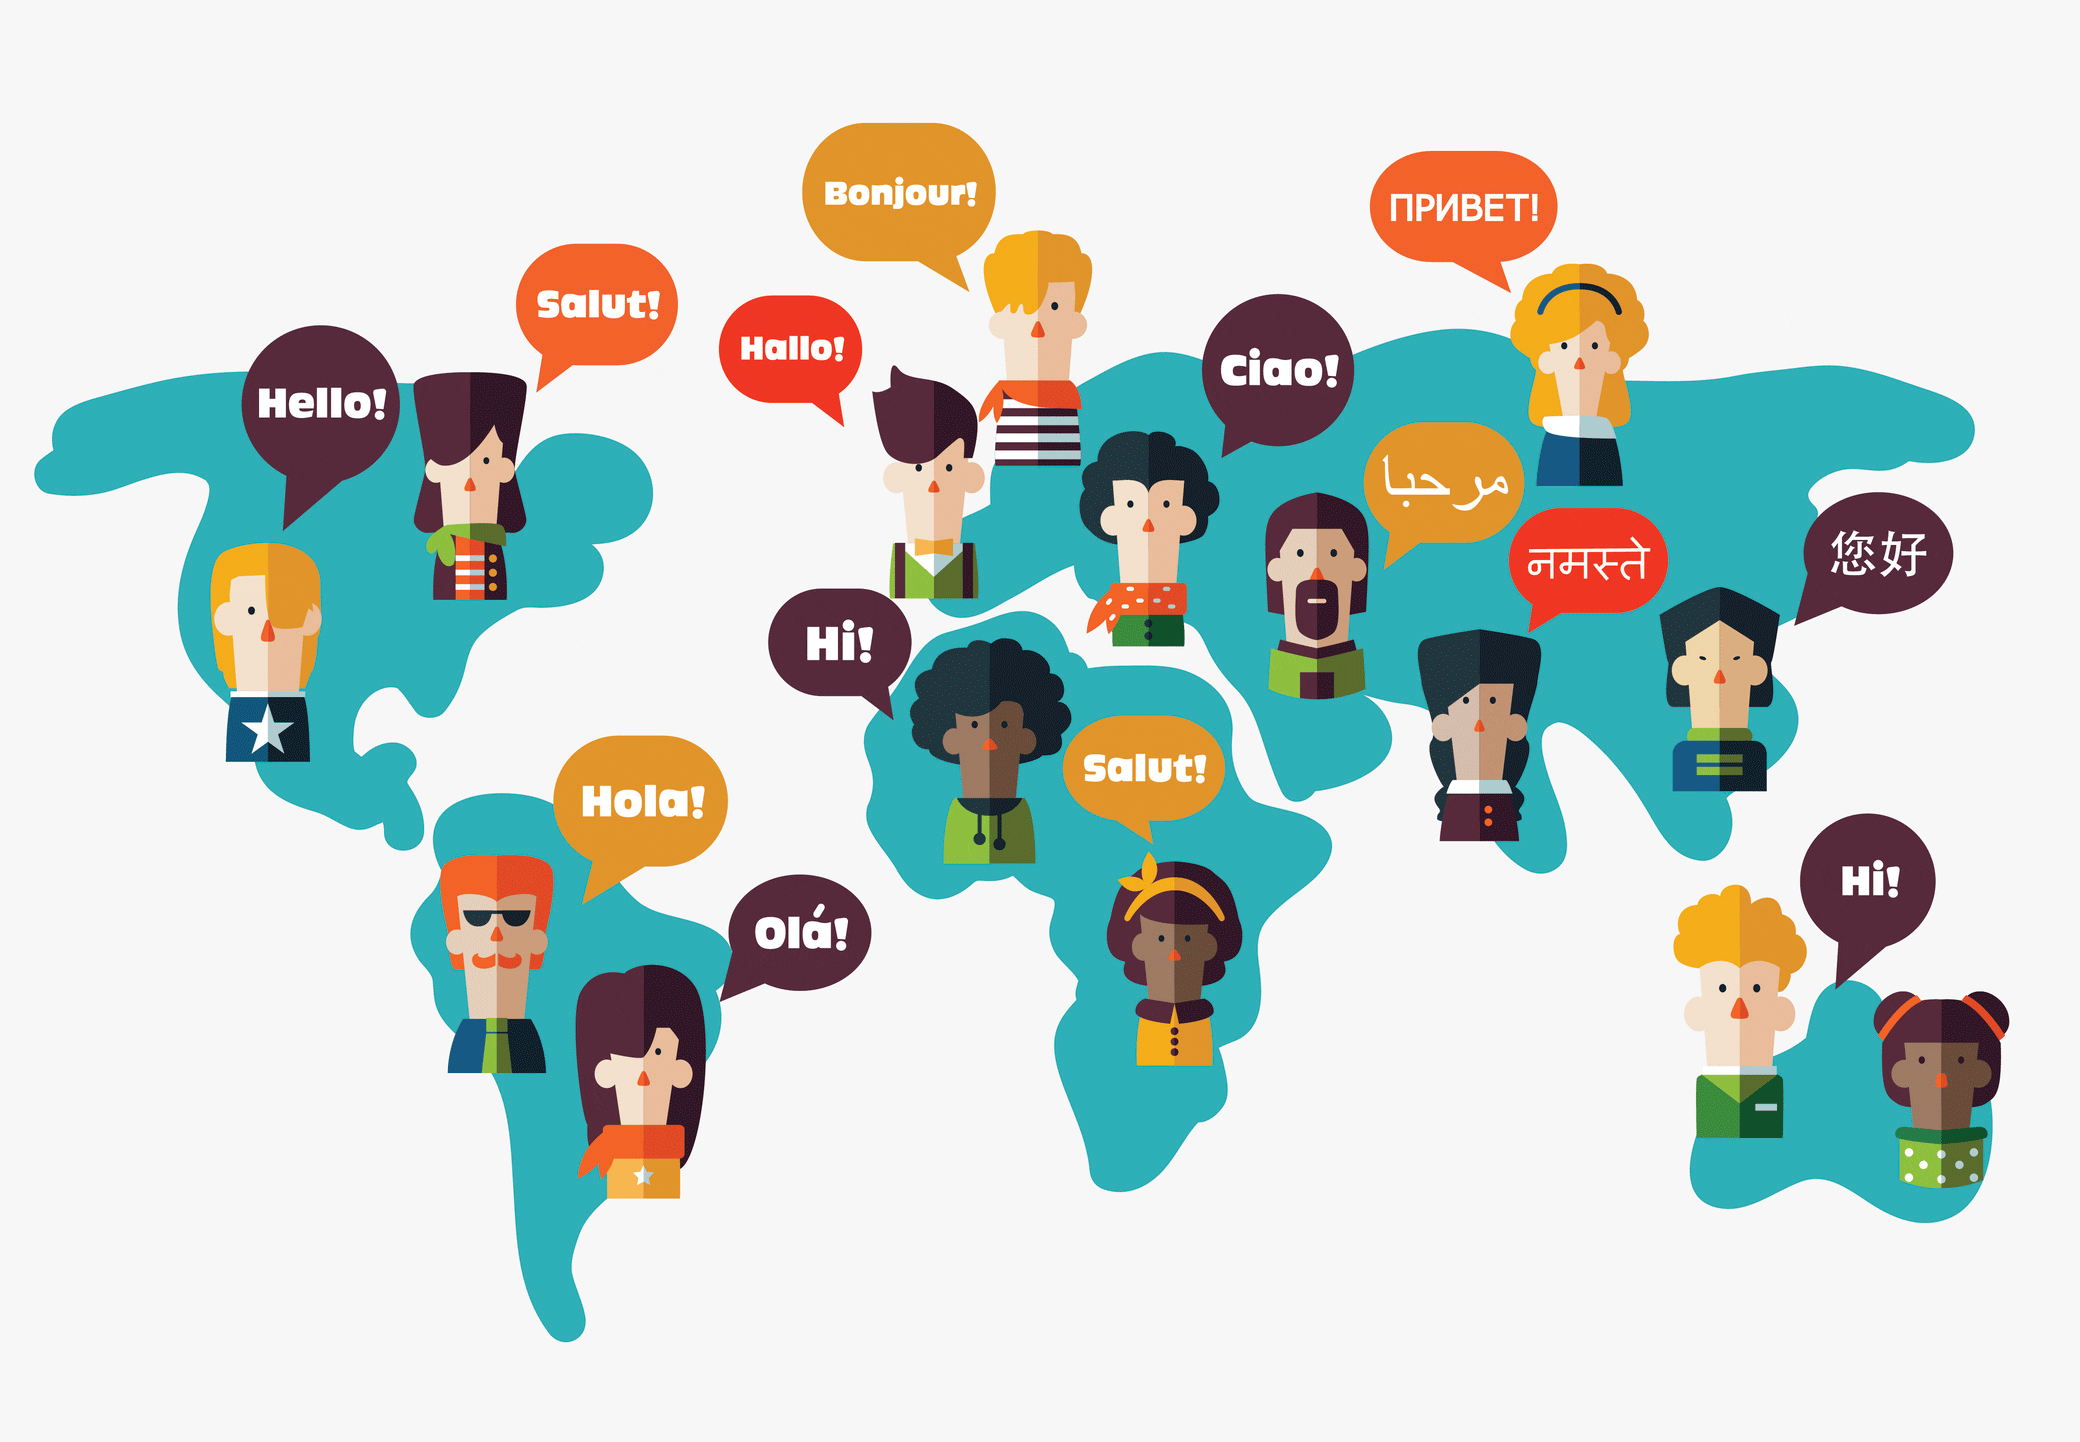 cuba language 24x7offshoring Spanish is the main language in Cuba. Although it is not a local language, the island's different ethnic groups have influenced the speech patterns. https://24x7offshoring.com/cuba-language/